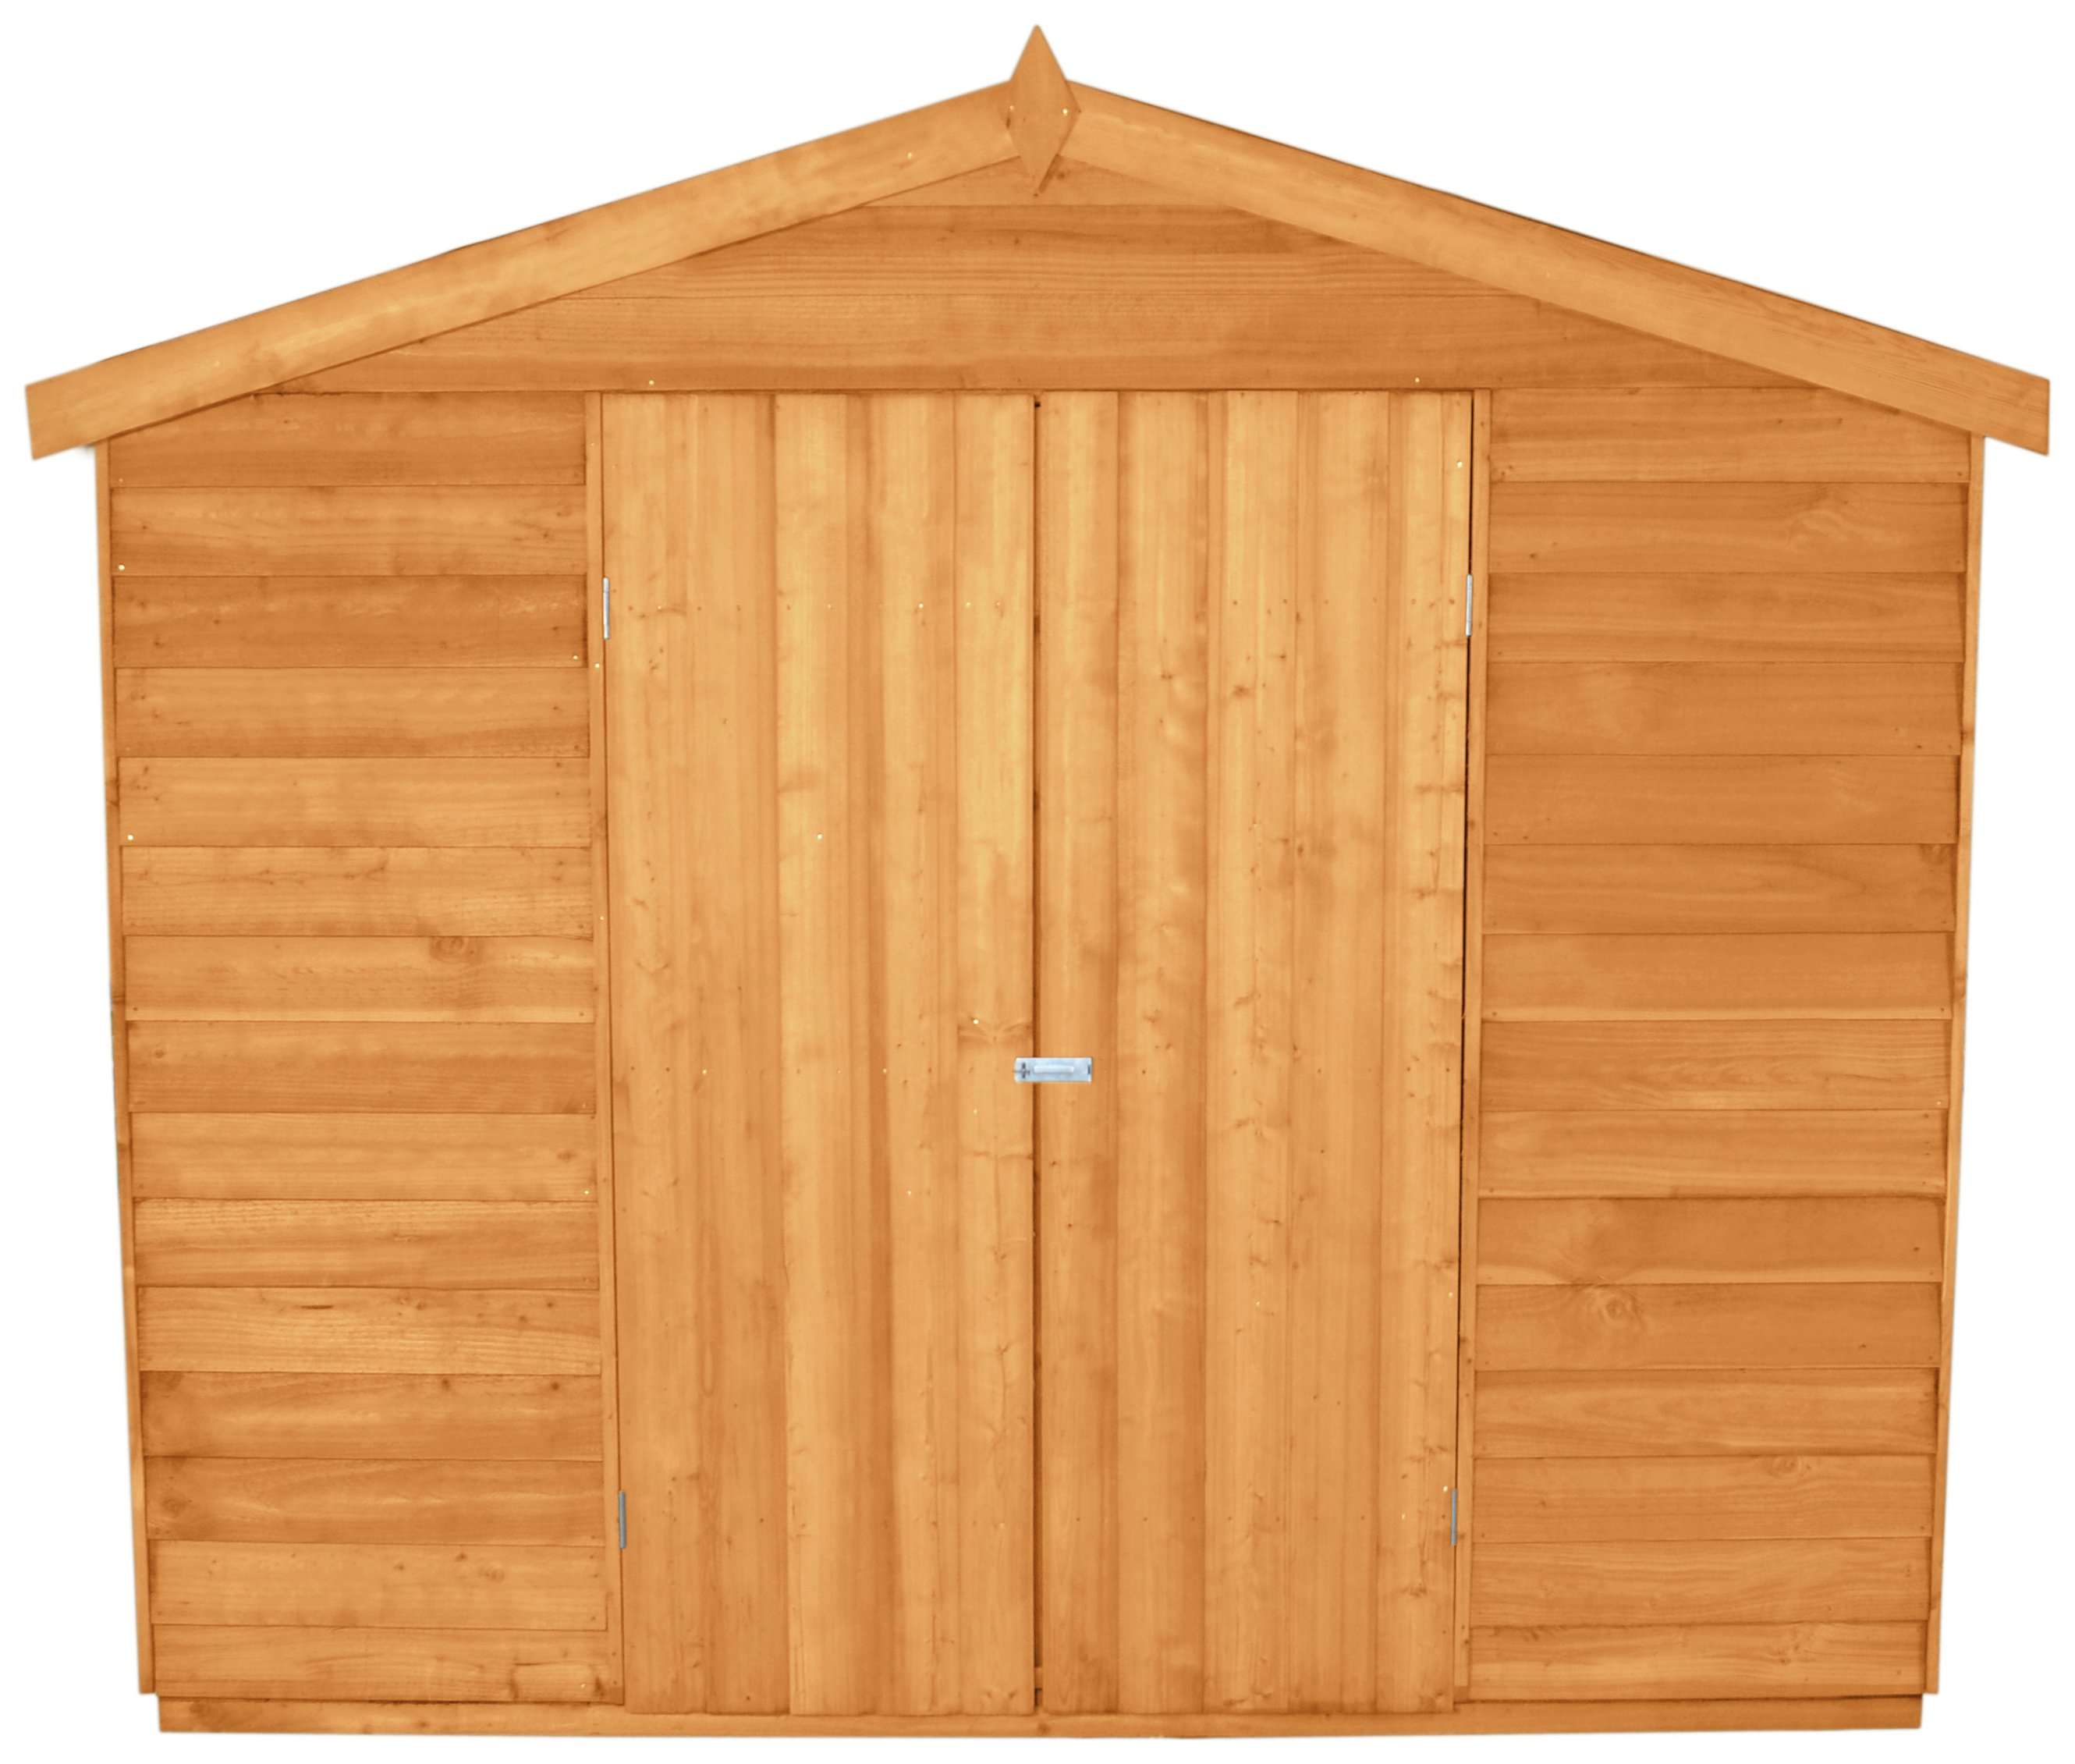 Forest Wooden 12 x 8ft Overlap Double Door Apex Shed